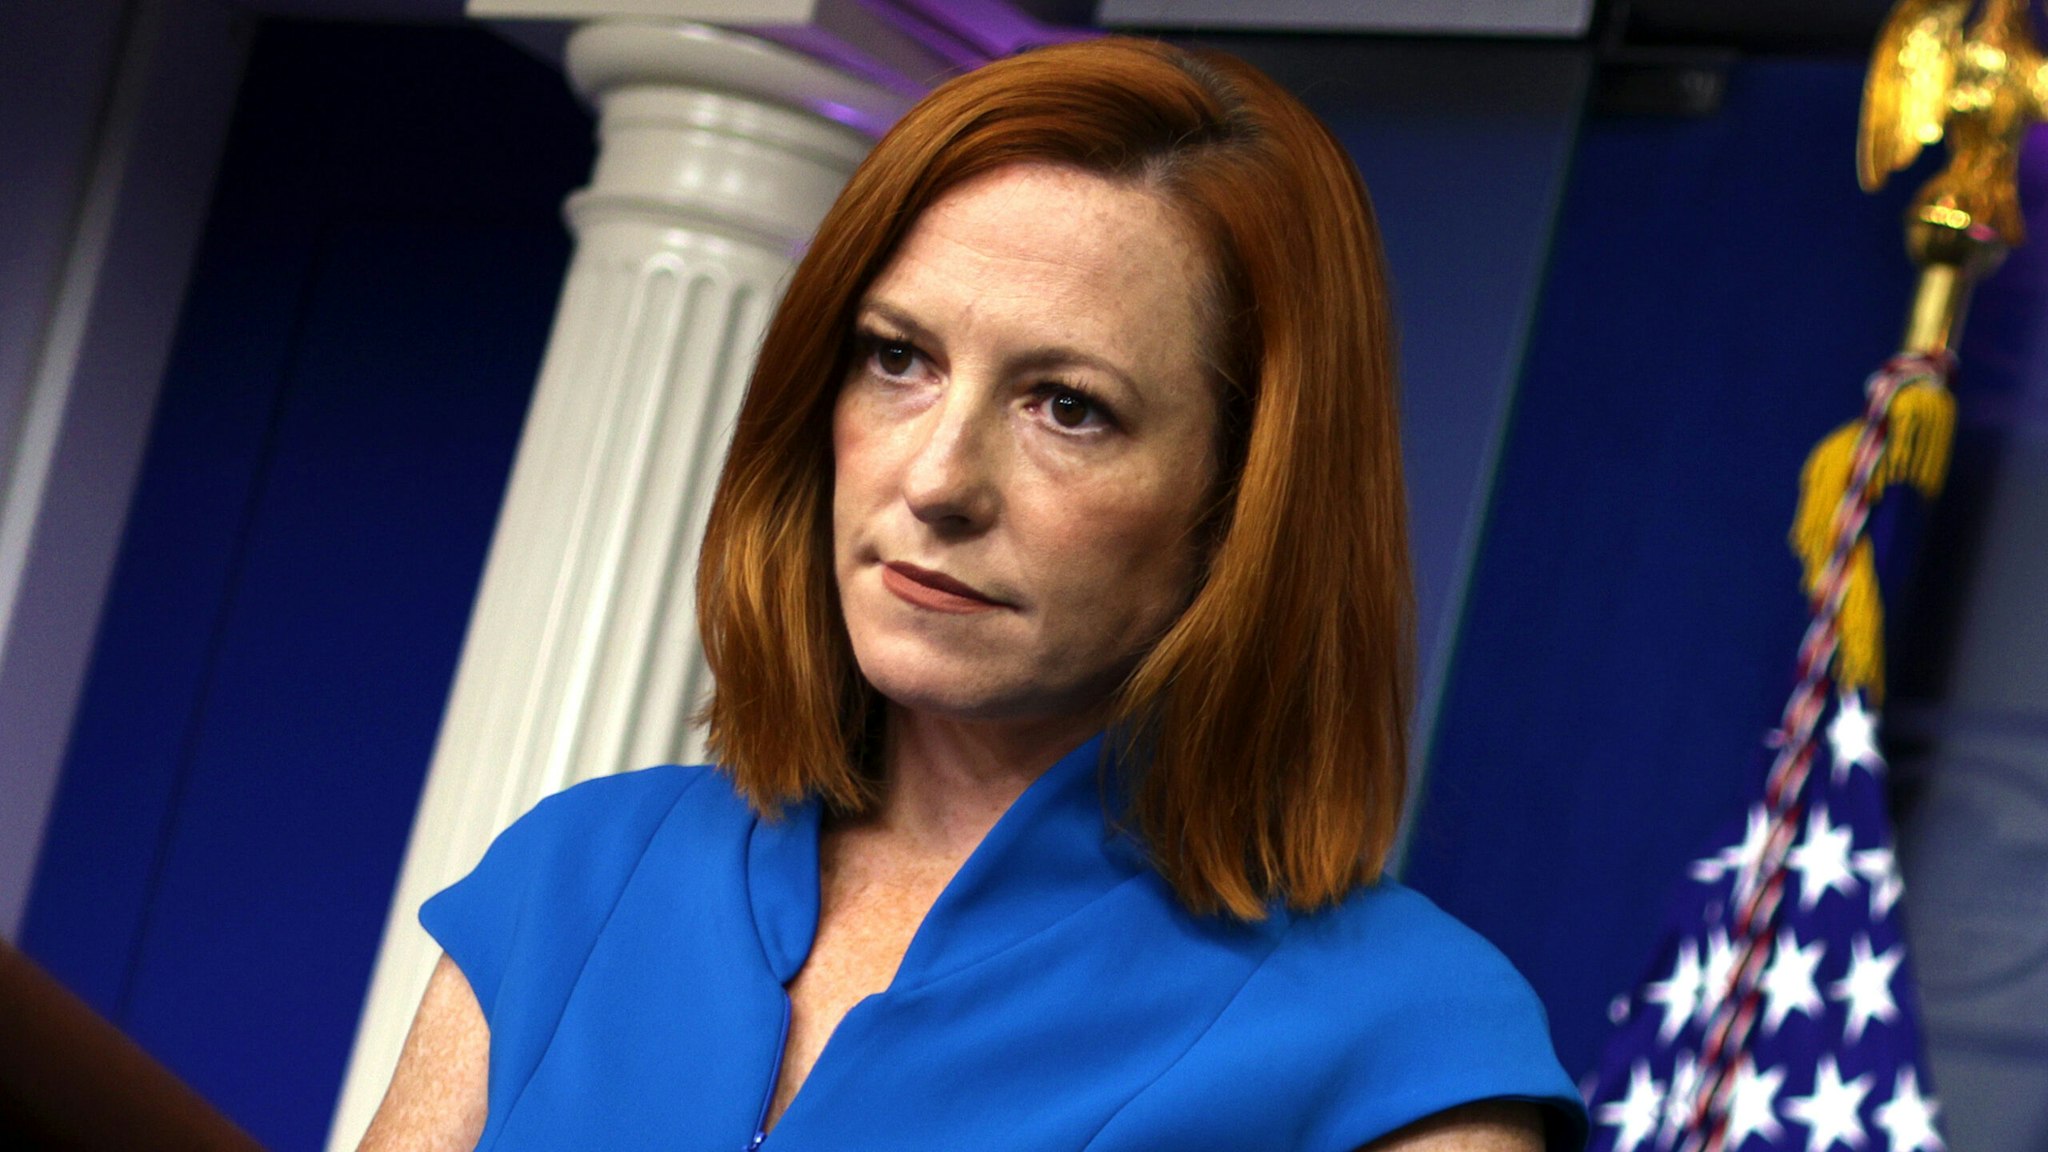 WASHINGTON, DC - AUGUST 11: White House Press Secretary Jen Psaki speaks during a daily press briefing at the James Brady Press Briefing Room of the White House August 11, 2021 in Washington, DC. Psaki held a daily briefing to answer questions from members of the press.